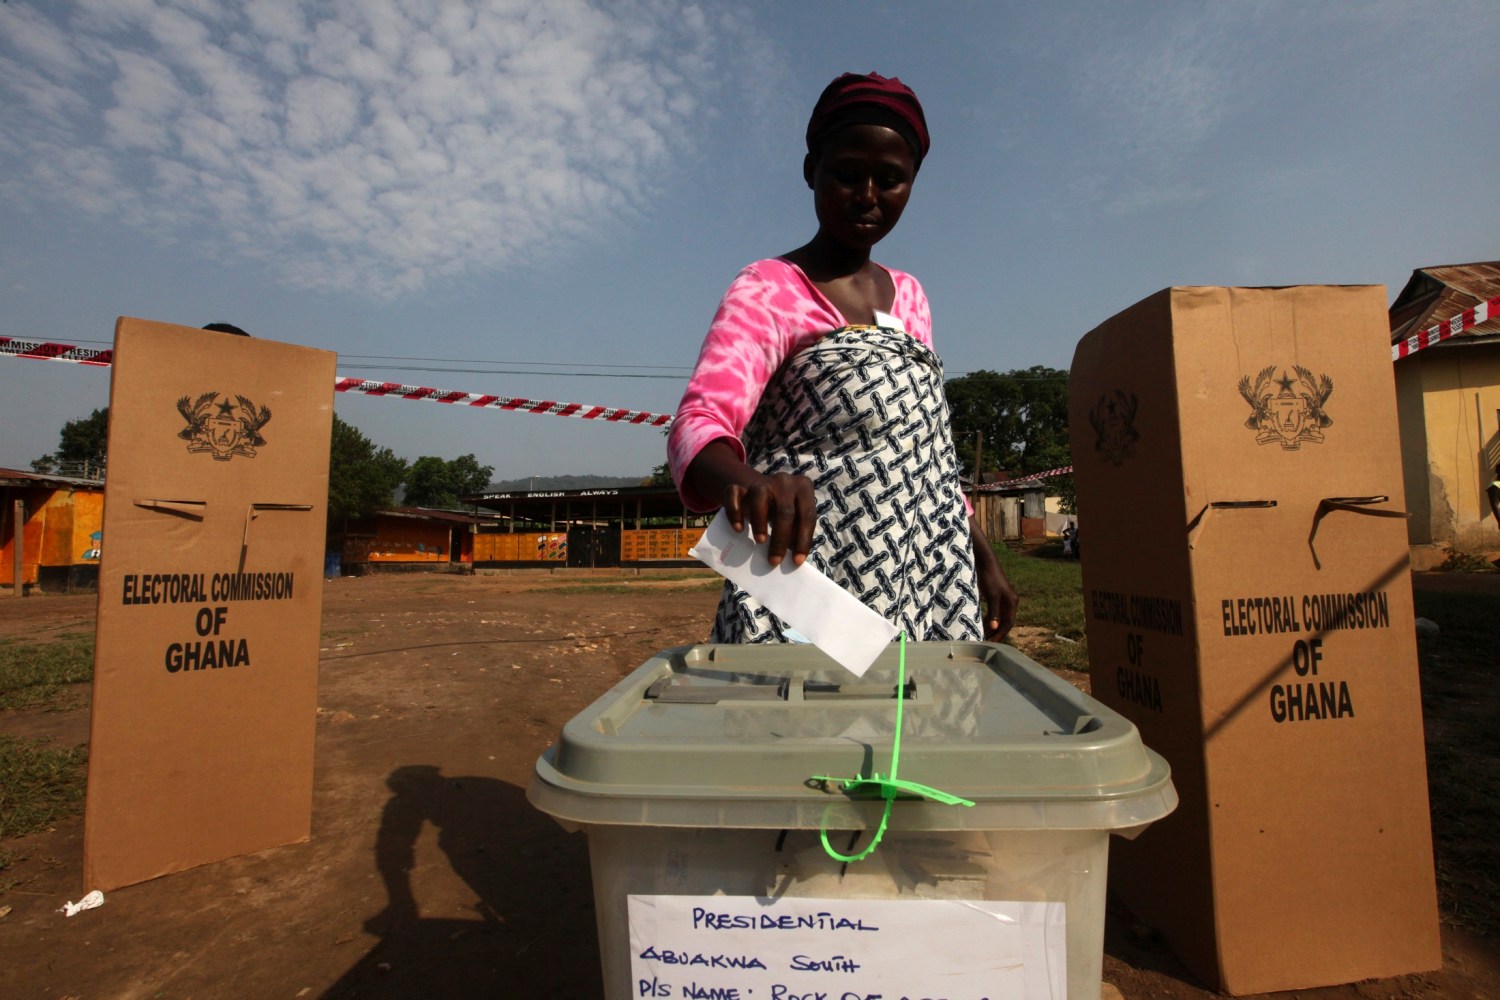 A woman votes at a polling station in Kibi, eastern region of Ghana and stronghold of presidential candidate Nana Akufo-Addo of the opposition New Patriotic Party (NPP), December 7, 2012. Ghanaians choose on Friday who will run one of Africa's most stable democracies as a surge in oil revenues promises to boost development and economic growth. Ghana has earned a reputation as an oasis of stability and progress in West Africa, a part of the world better known for civil wars, coups, entrenched poverty and corruption. REUTERS/Luc Gnago (GHANA - Tags: POLITICS ELECTIONS) - GM1E8C71DSM01